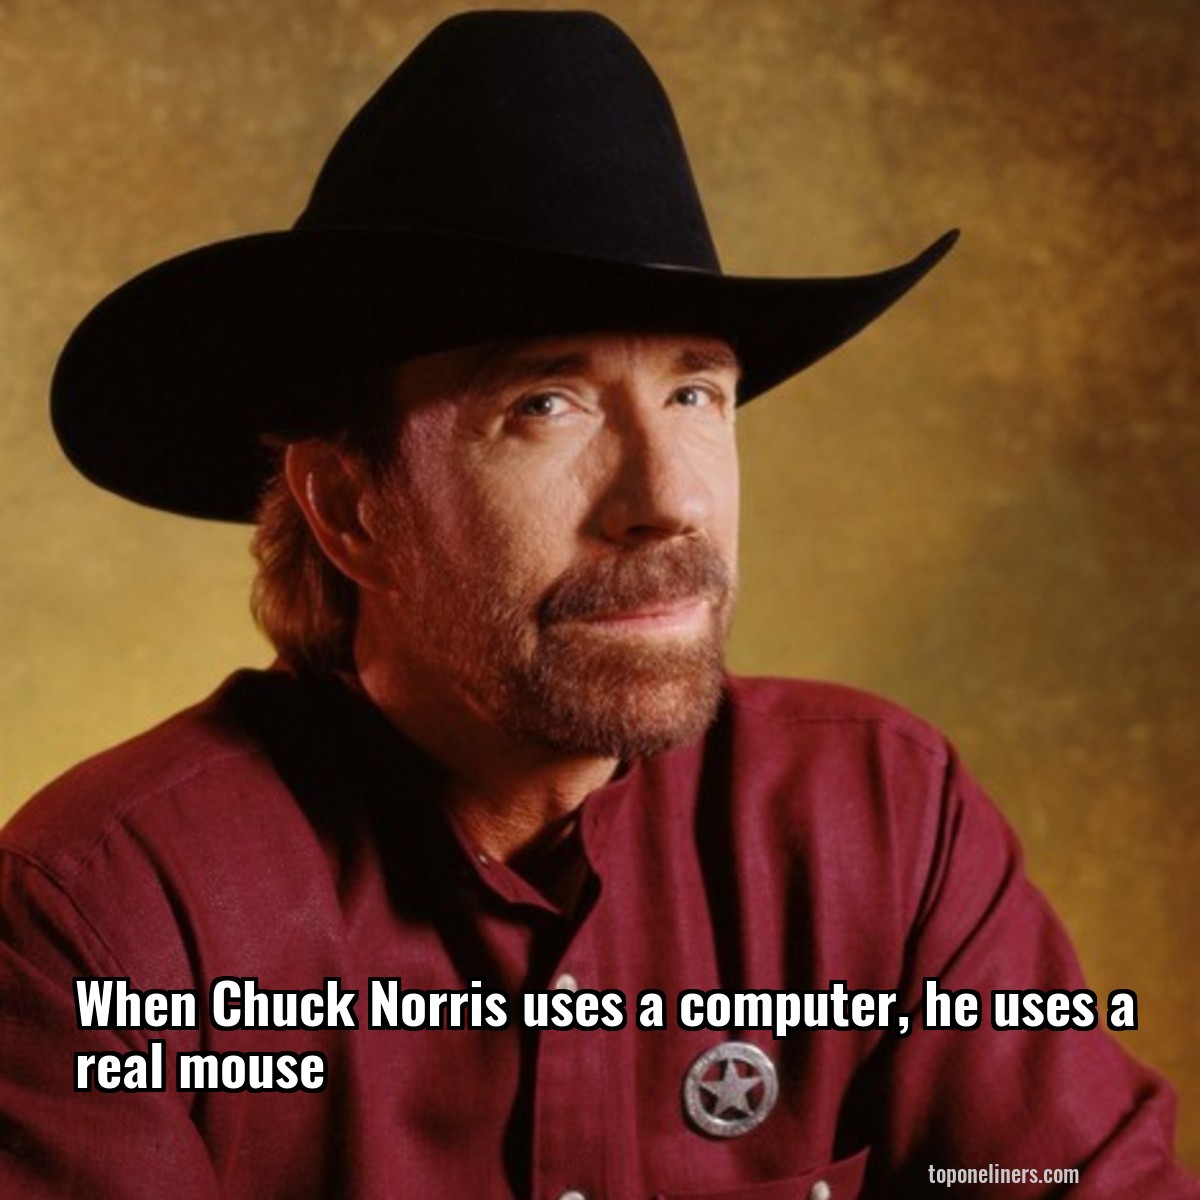 When Chuck Norris uses a computer, he uses a real mouse